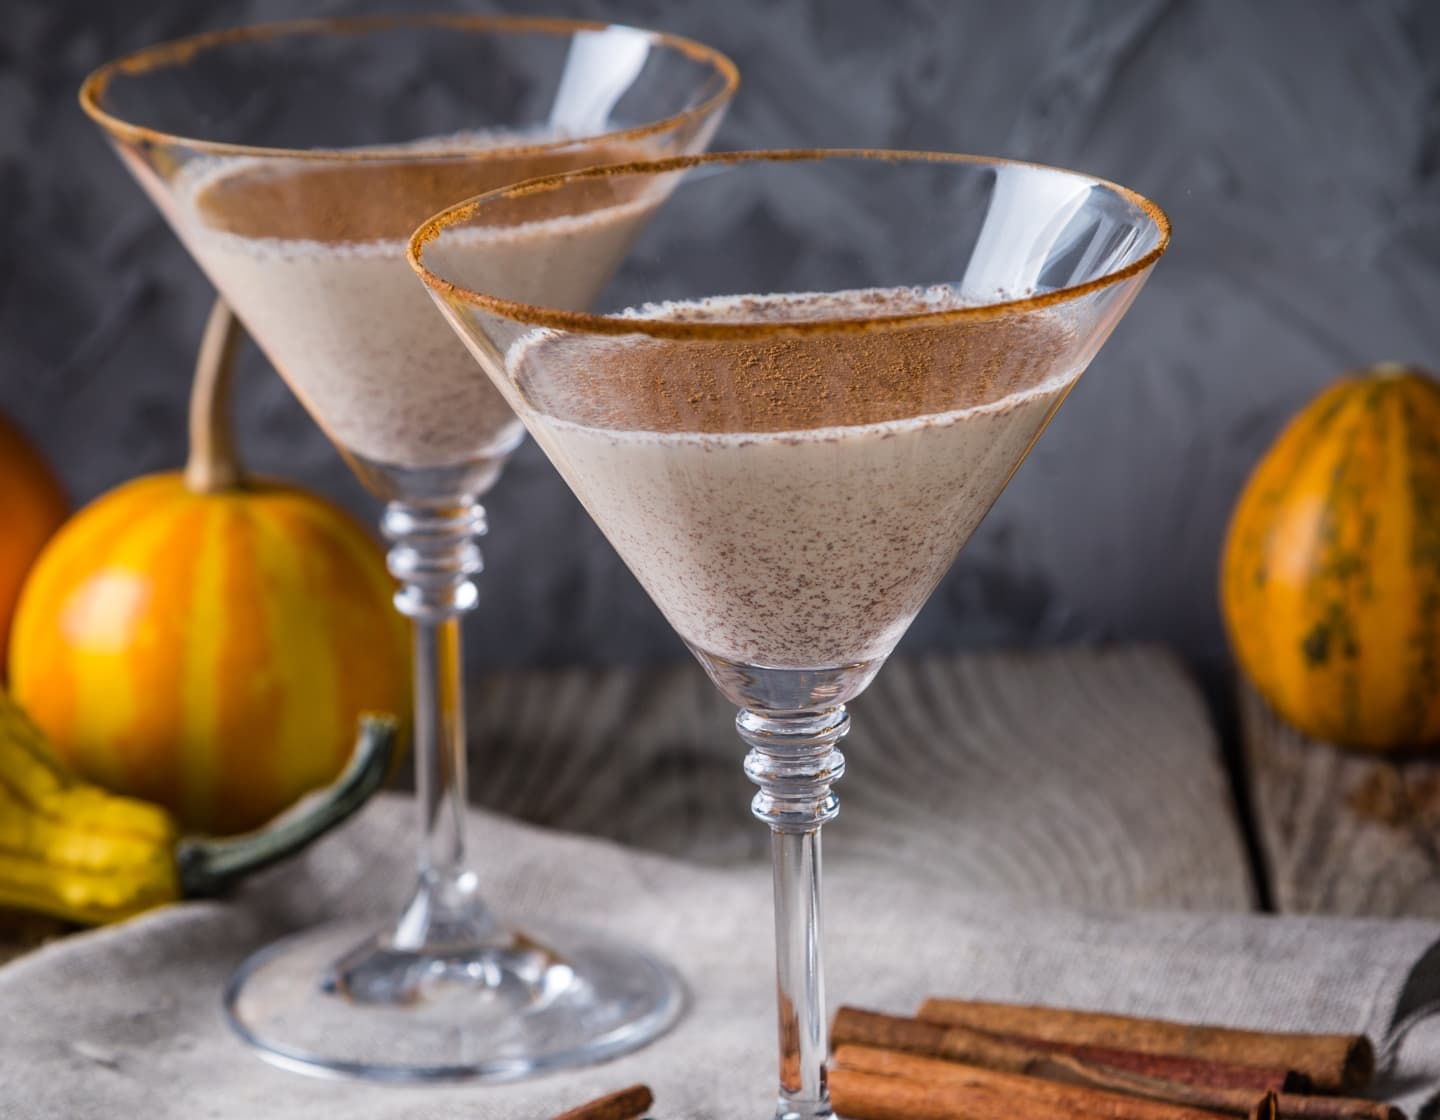 Two glasses of an autumn martini cocktail, with cinnamon sticks and small pumpkins surrounding them.